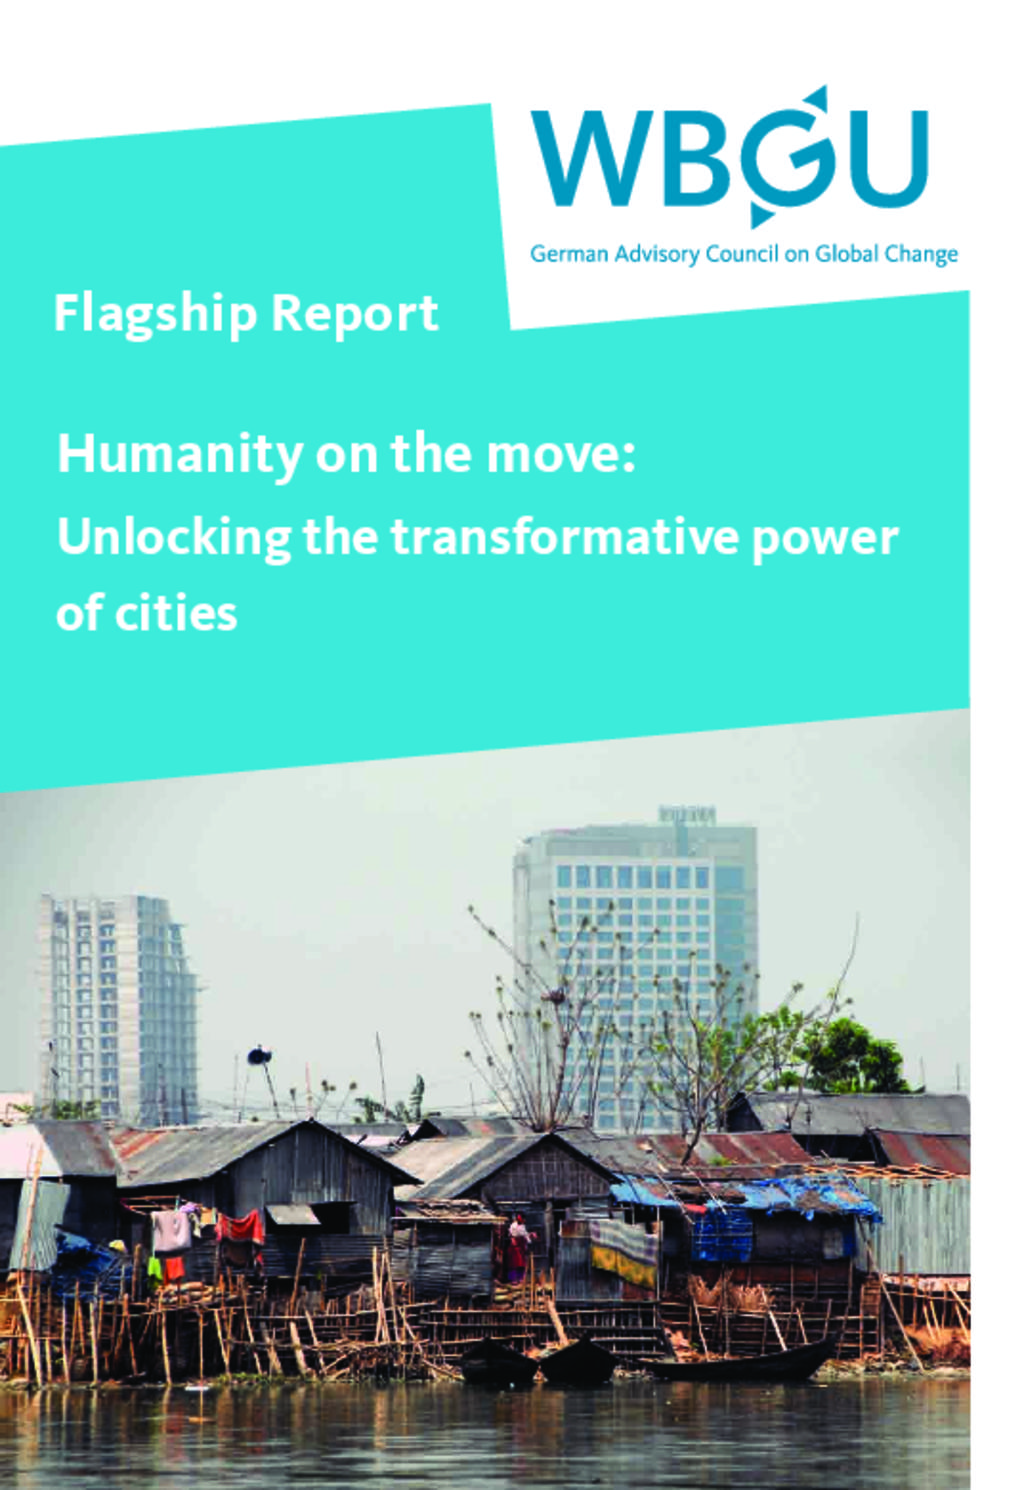 Humanity on the move: Unlocking the transformative power of cities